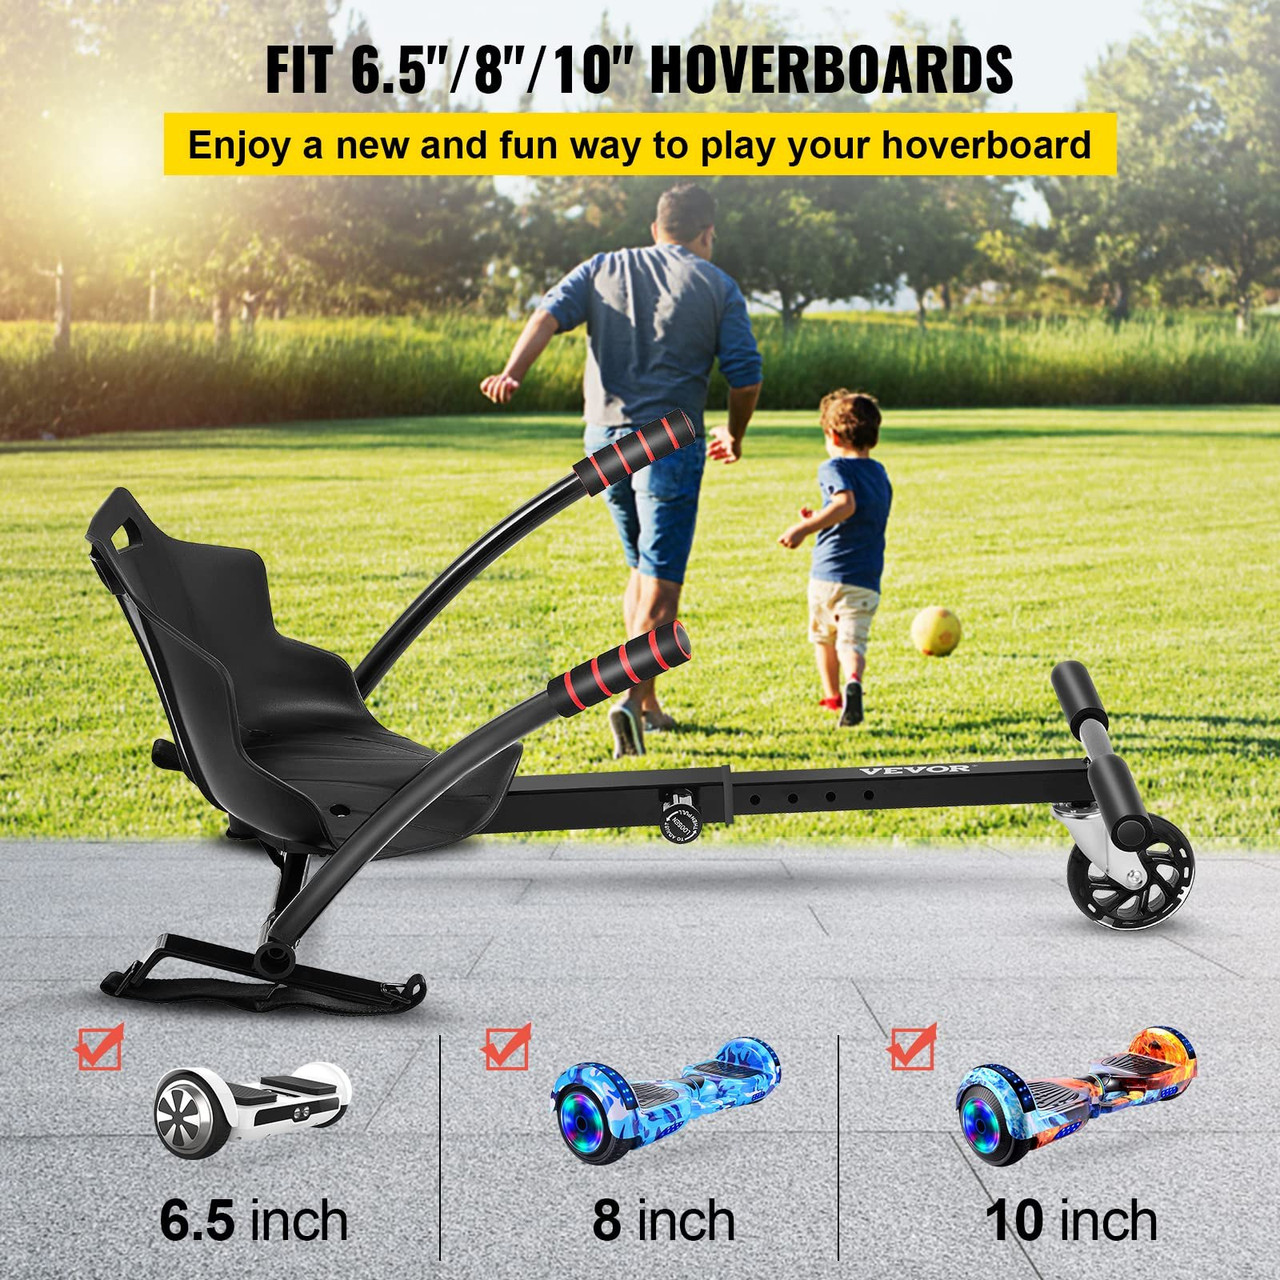 Hoverboard Seat Attachment for 6.5" 8" 10" Self Balancing Scooter, Hoverboard Kart for Kids or Adults, Black Hoverboard Attachments Adjustable Frame Length